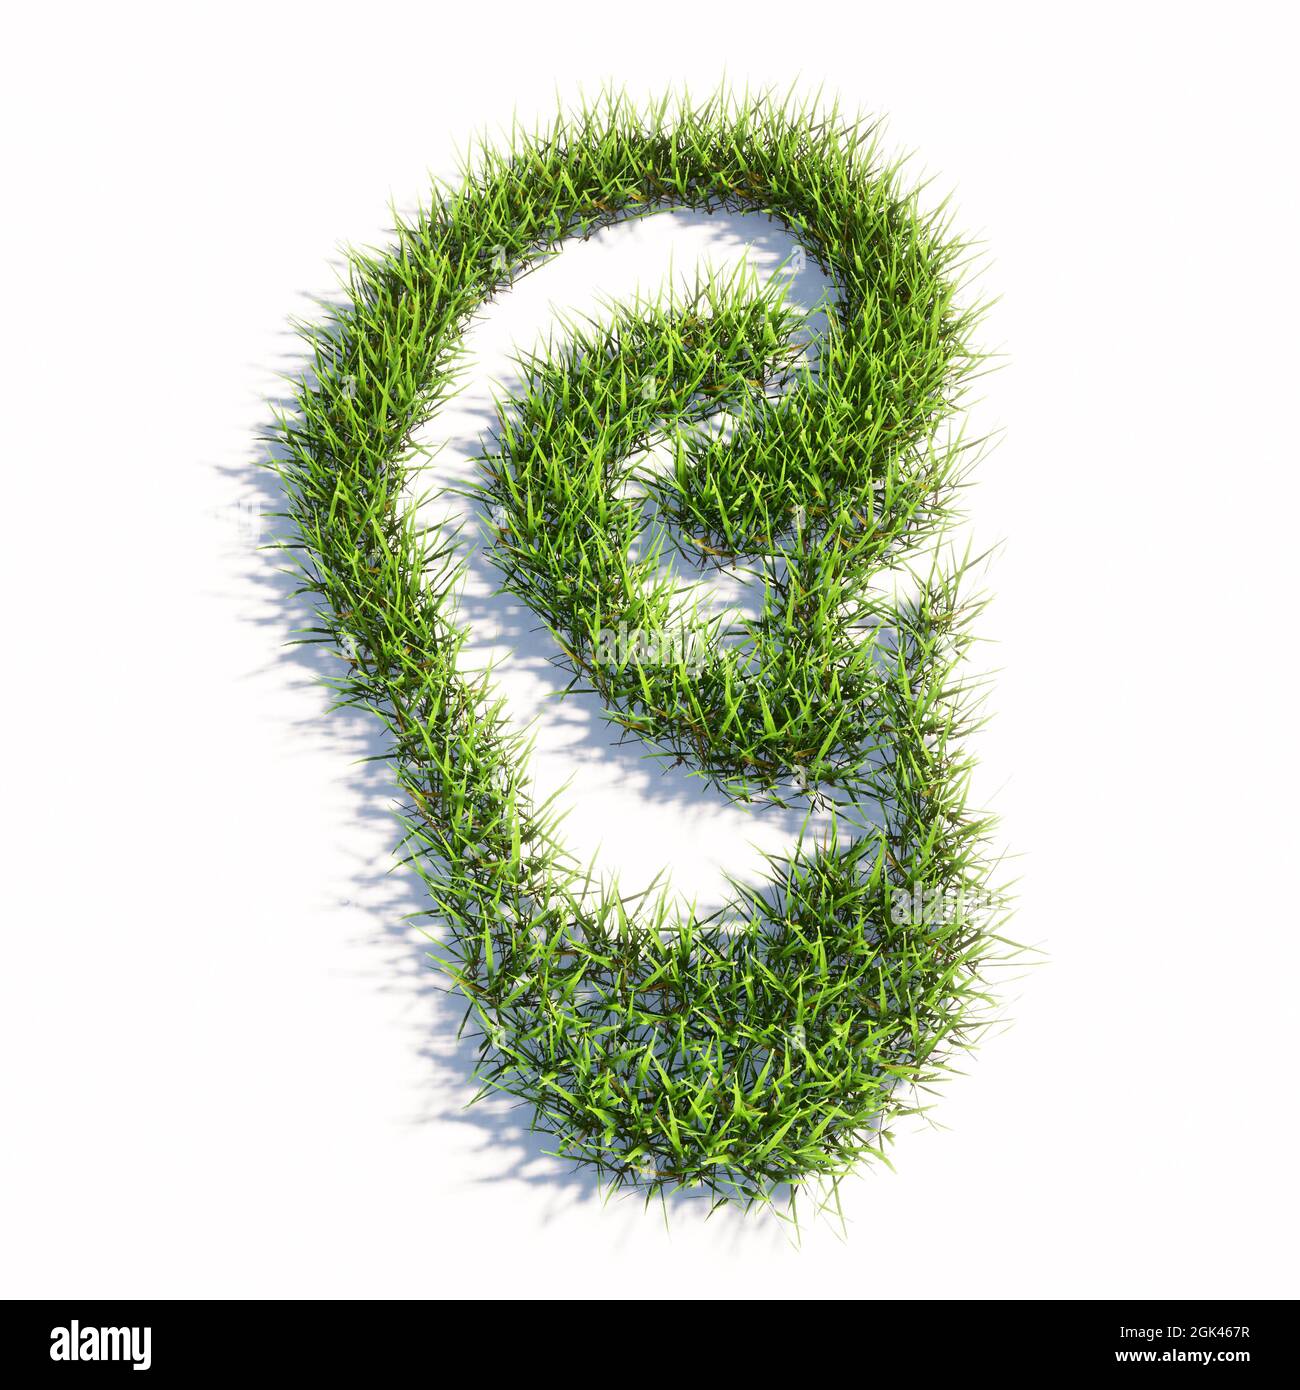 Concept or conceptual green summer lawn grass isolated on white background, sign of an ear.  A 3d illustration metaphor for hearing loss, tinnitus Stock Photo